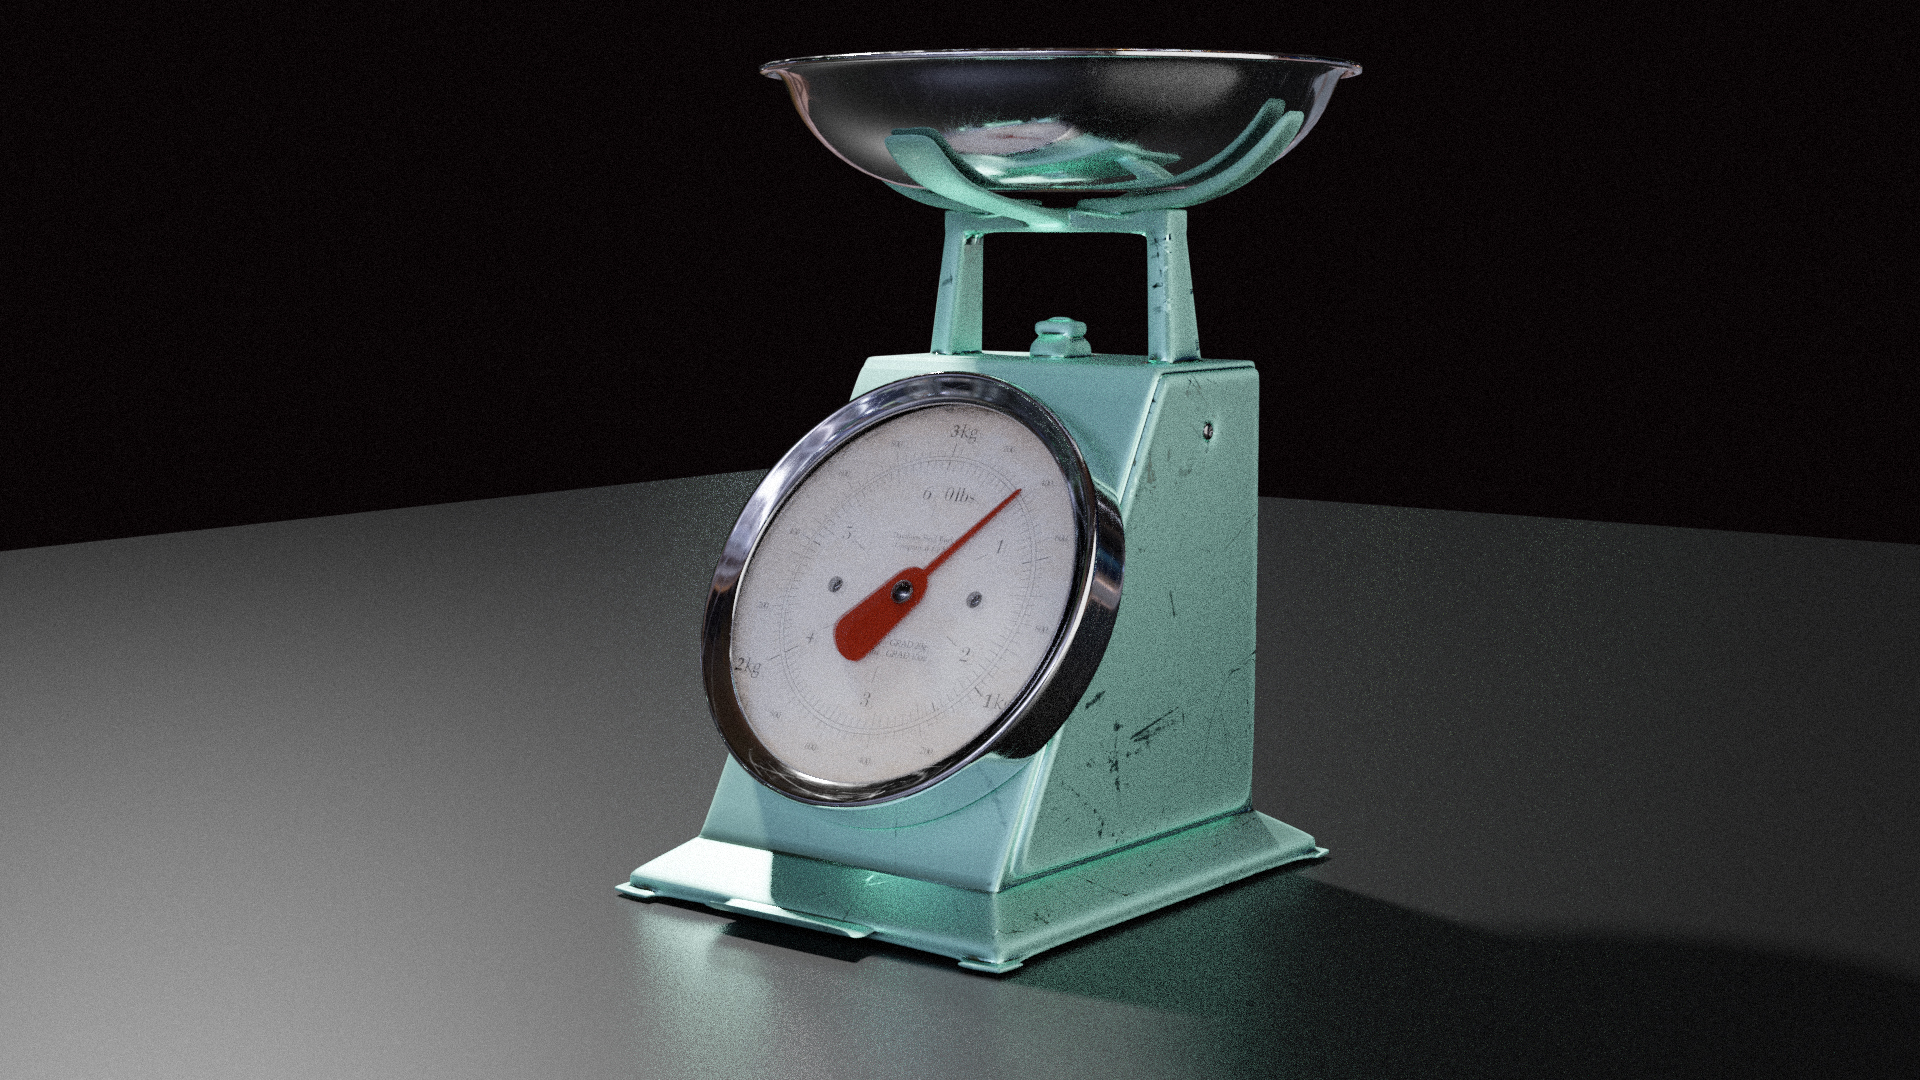 Old / Vintage Kitchen Scale (Scenefiller) by Davilion preview image 2